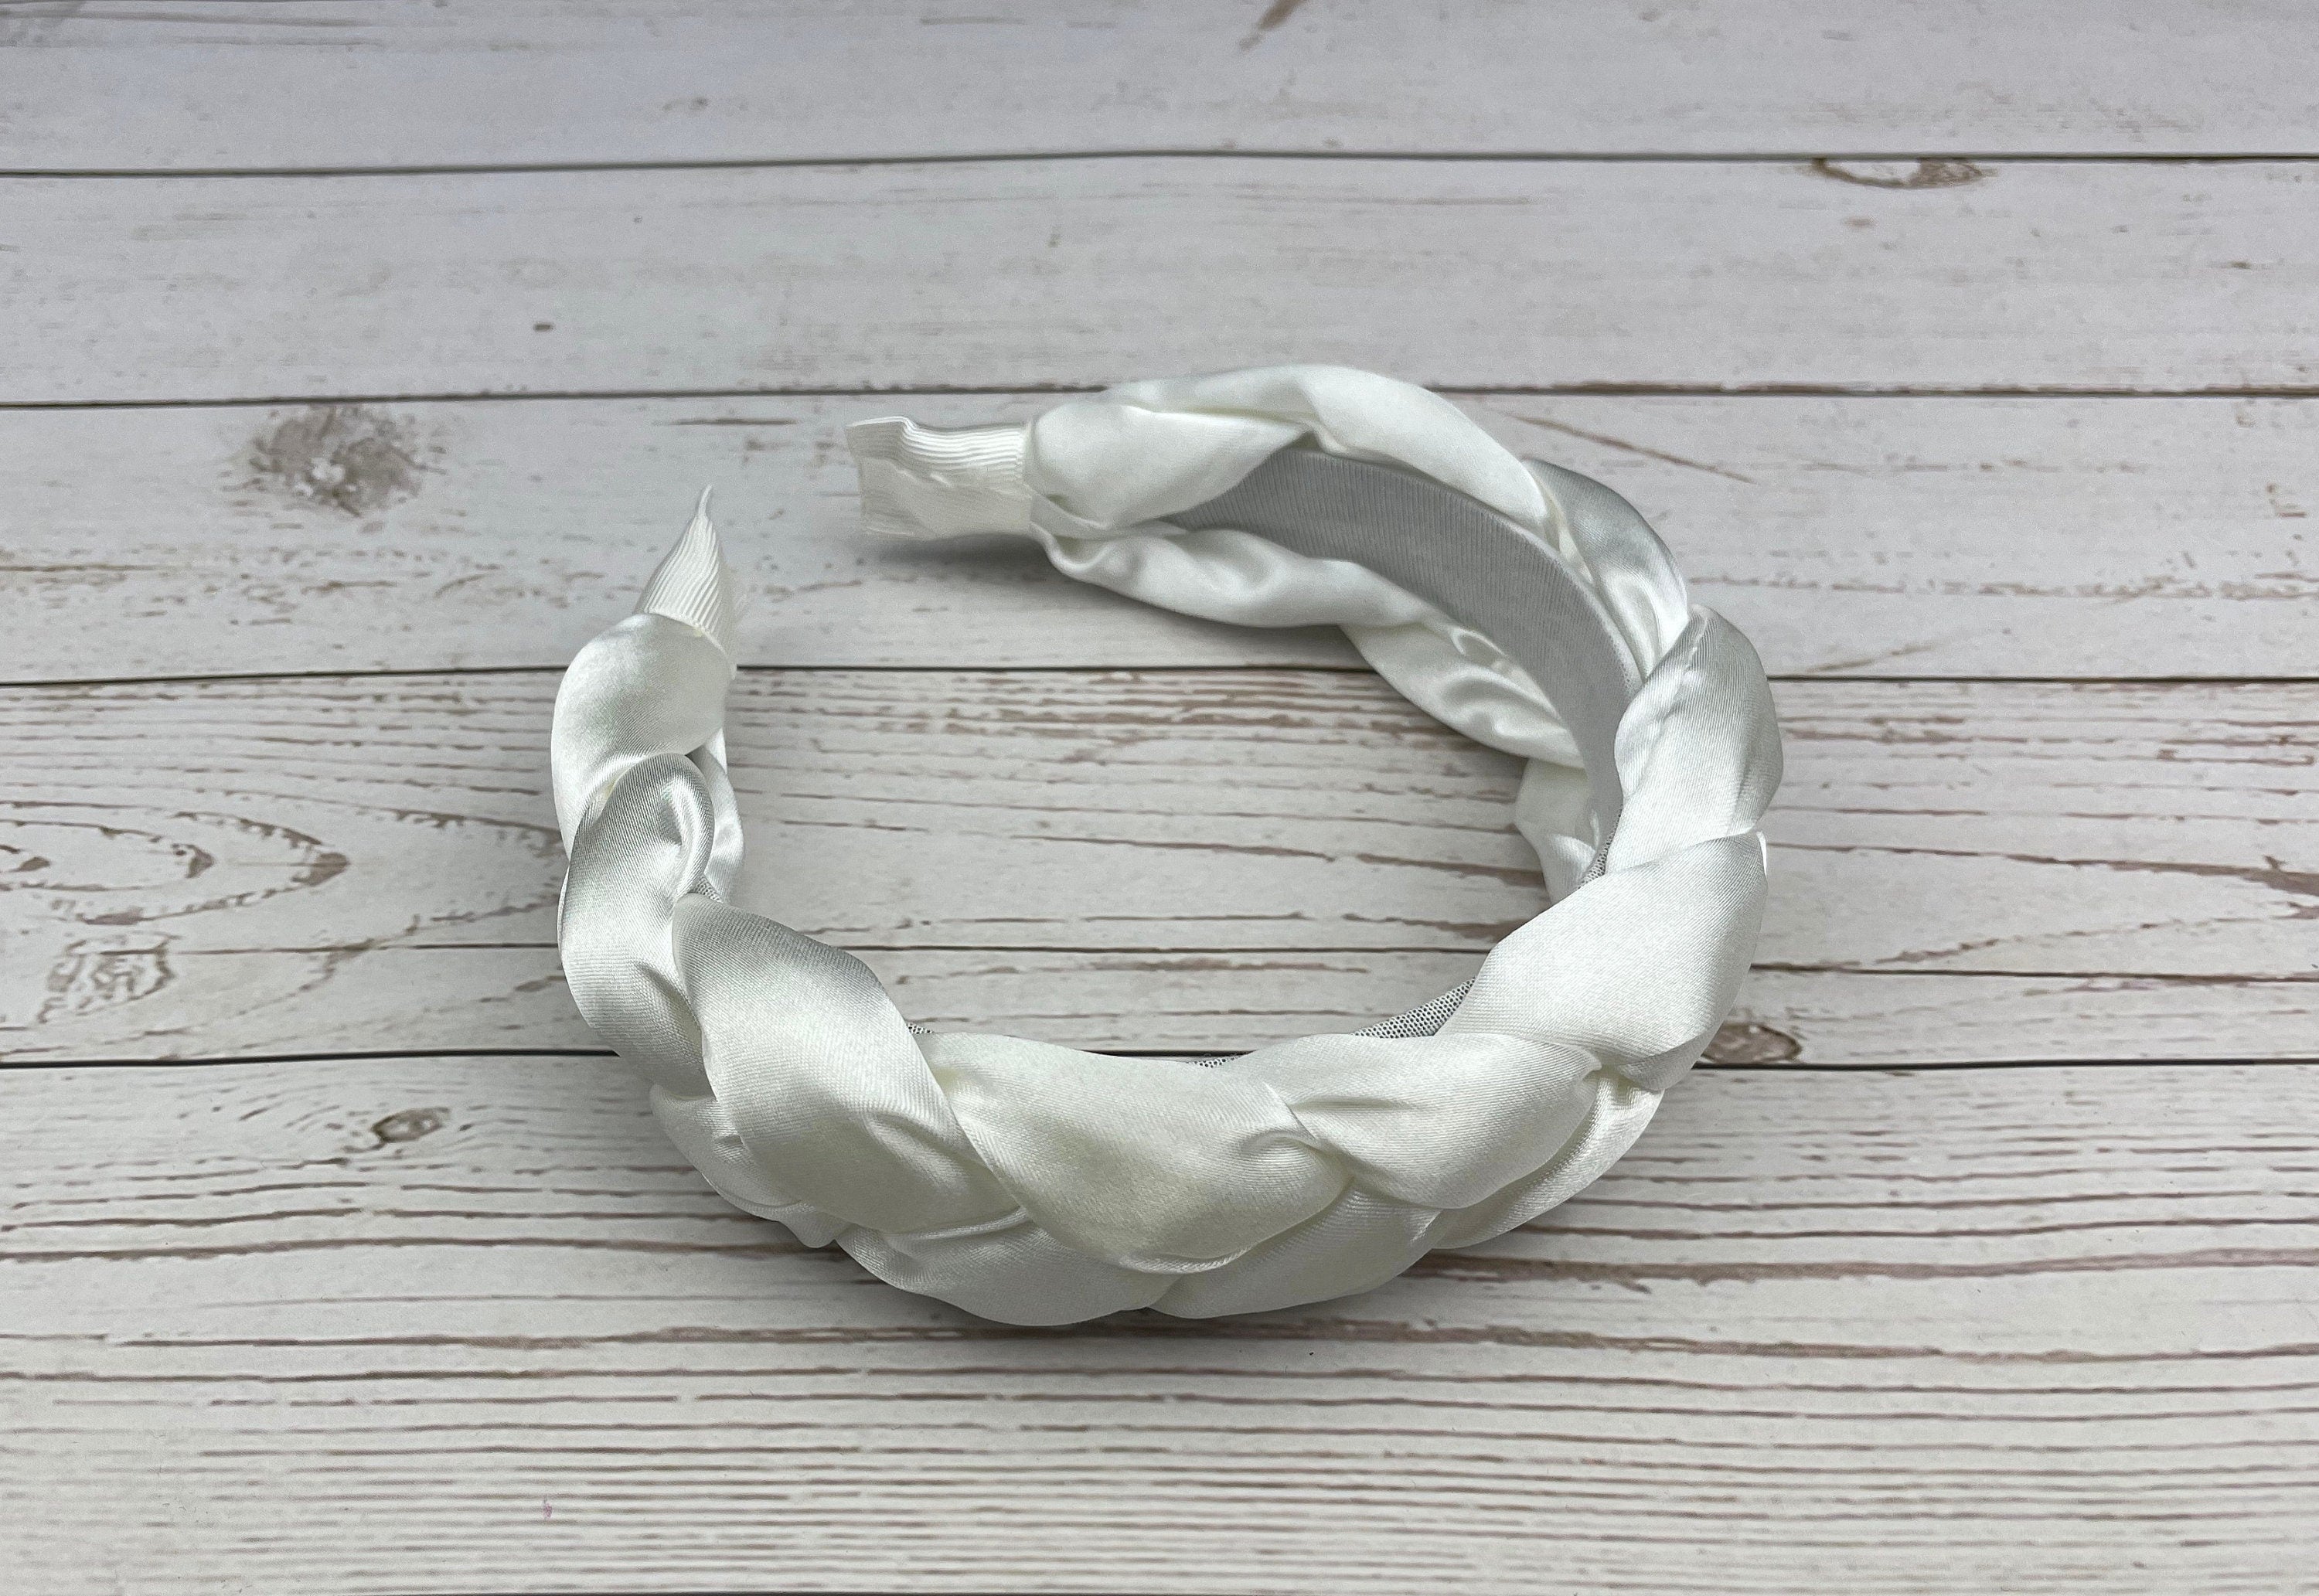 Celebrate in style with this elegant Snow White Padded Satin Knitted Headband, designed for women. The plush satin padding provides comfort and the knitted design adds a touch of sophistication to any celebration outfit.